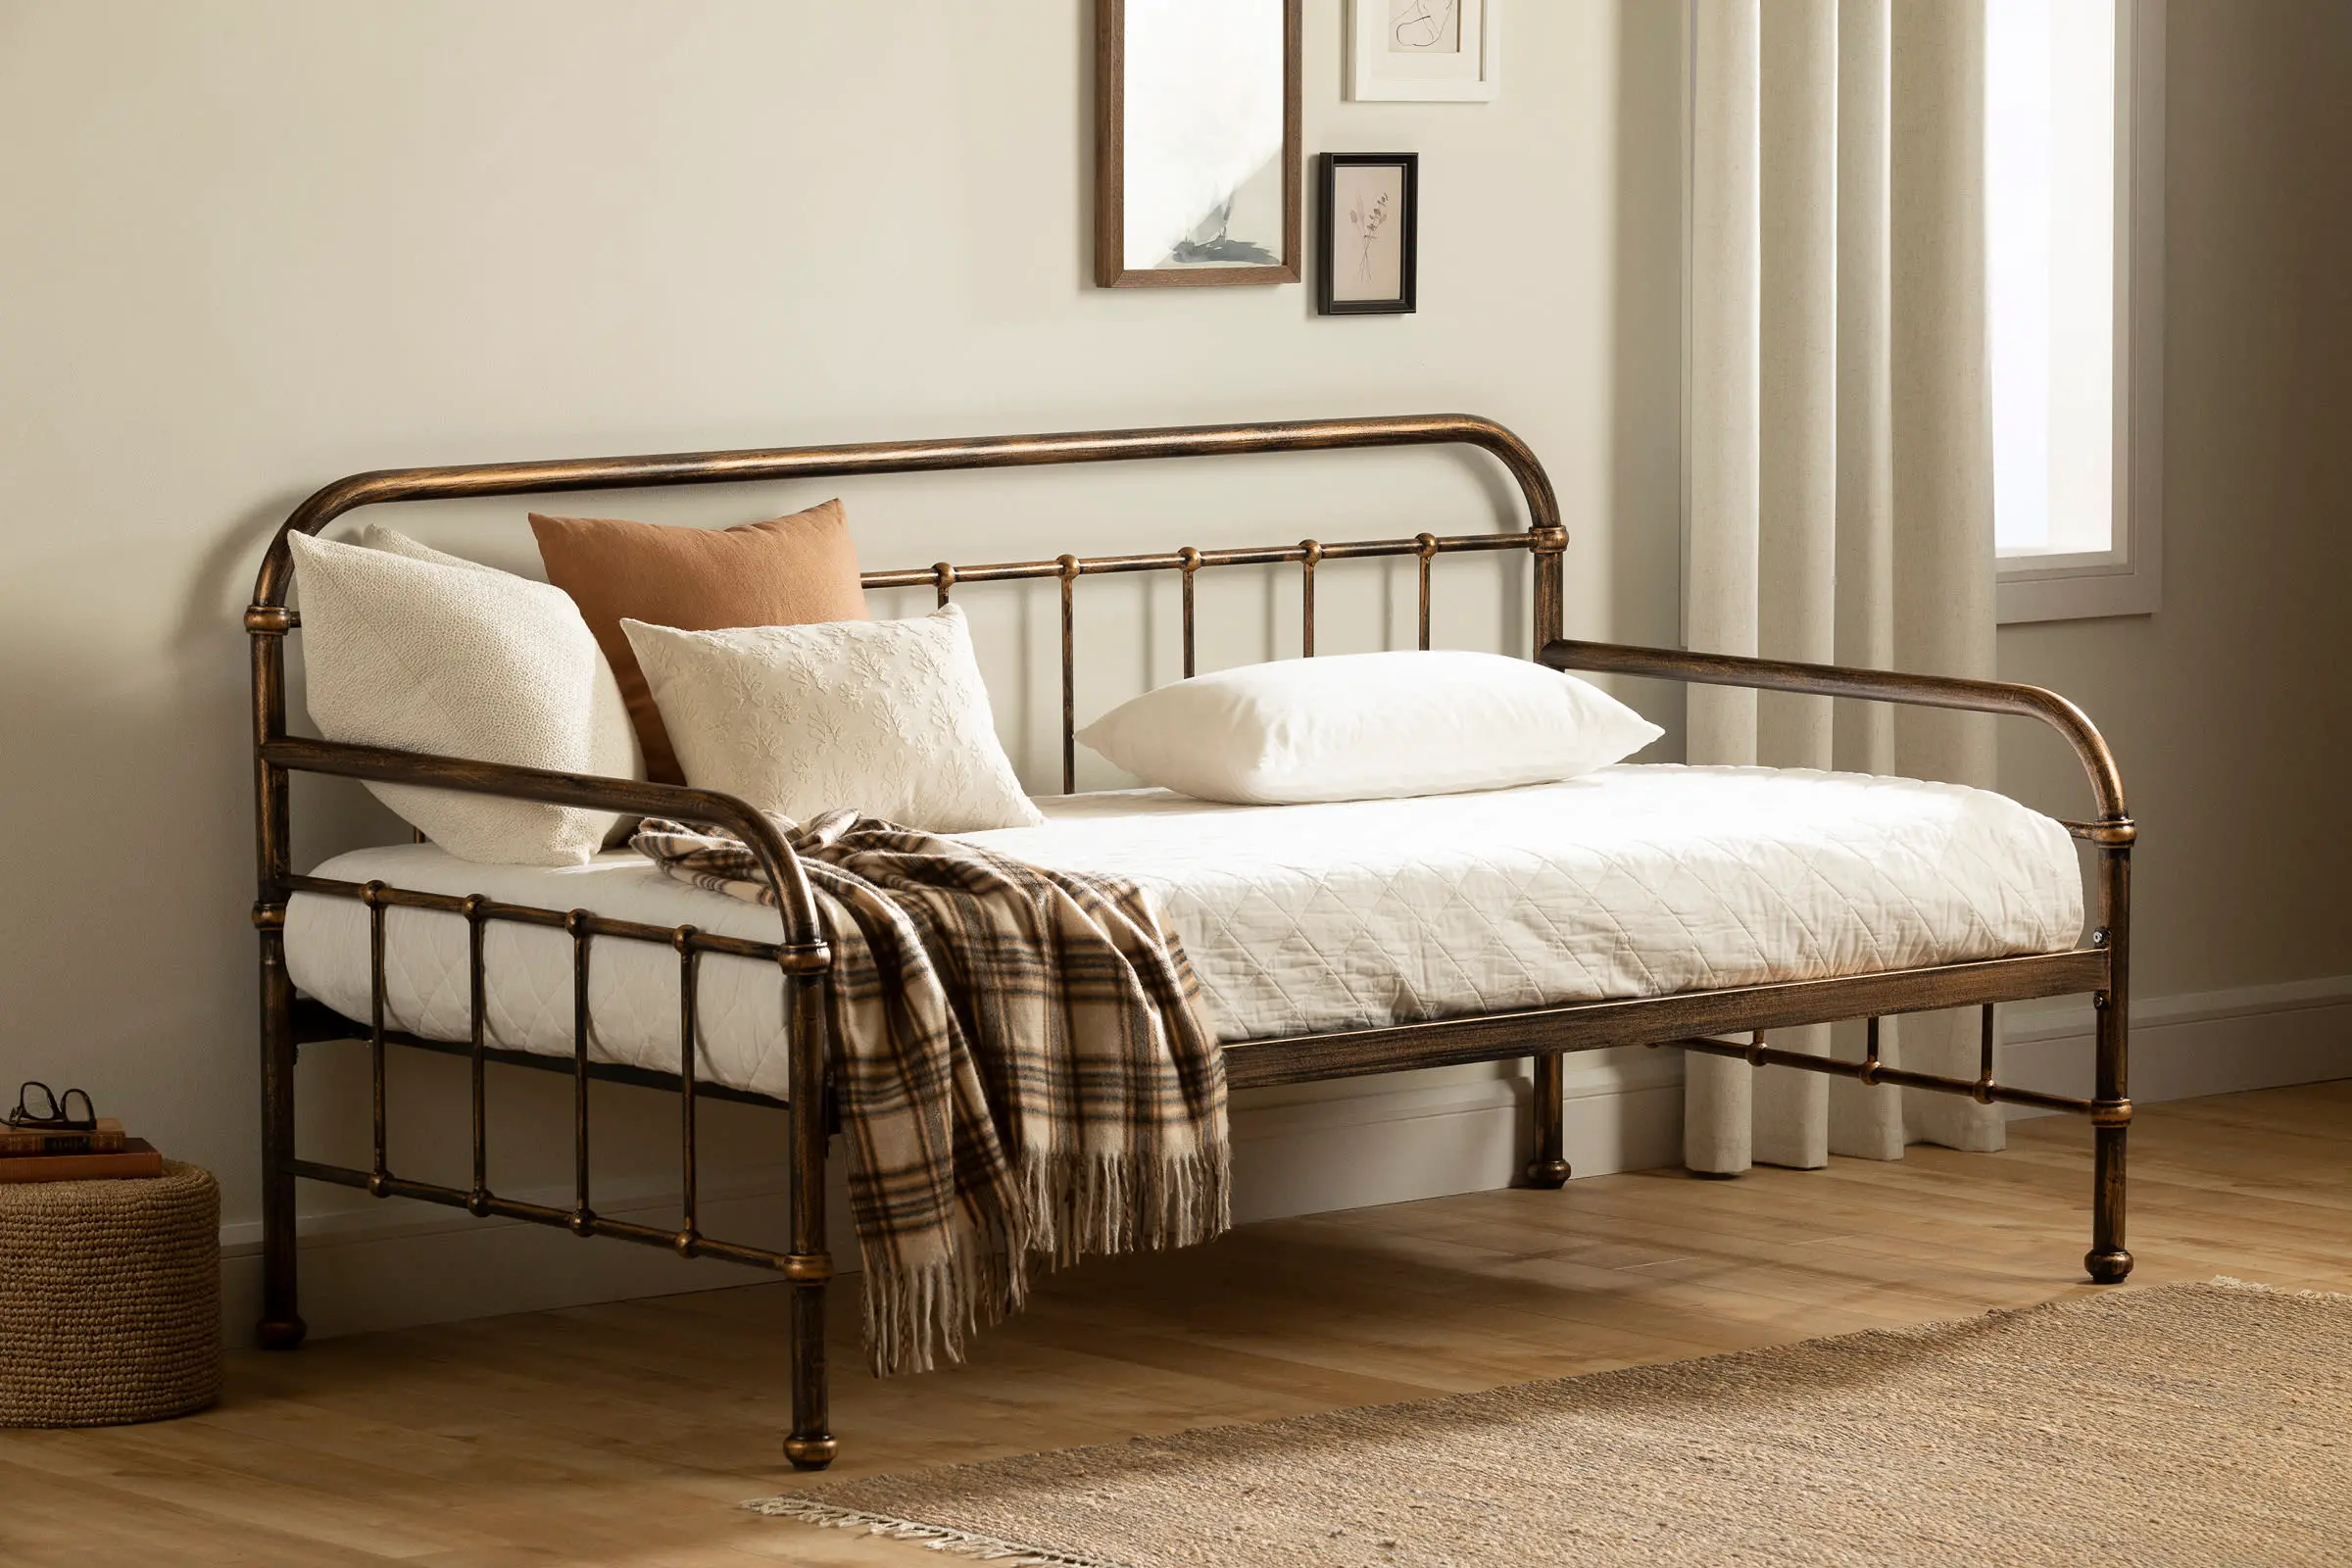 14137 Prairie Bronze Twin Metal Daybed - South Shore sku 14137